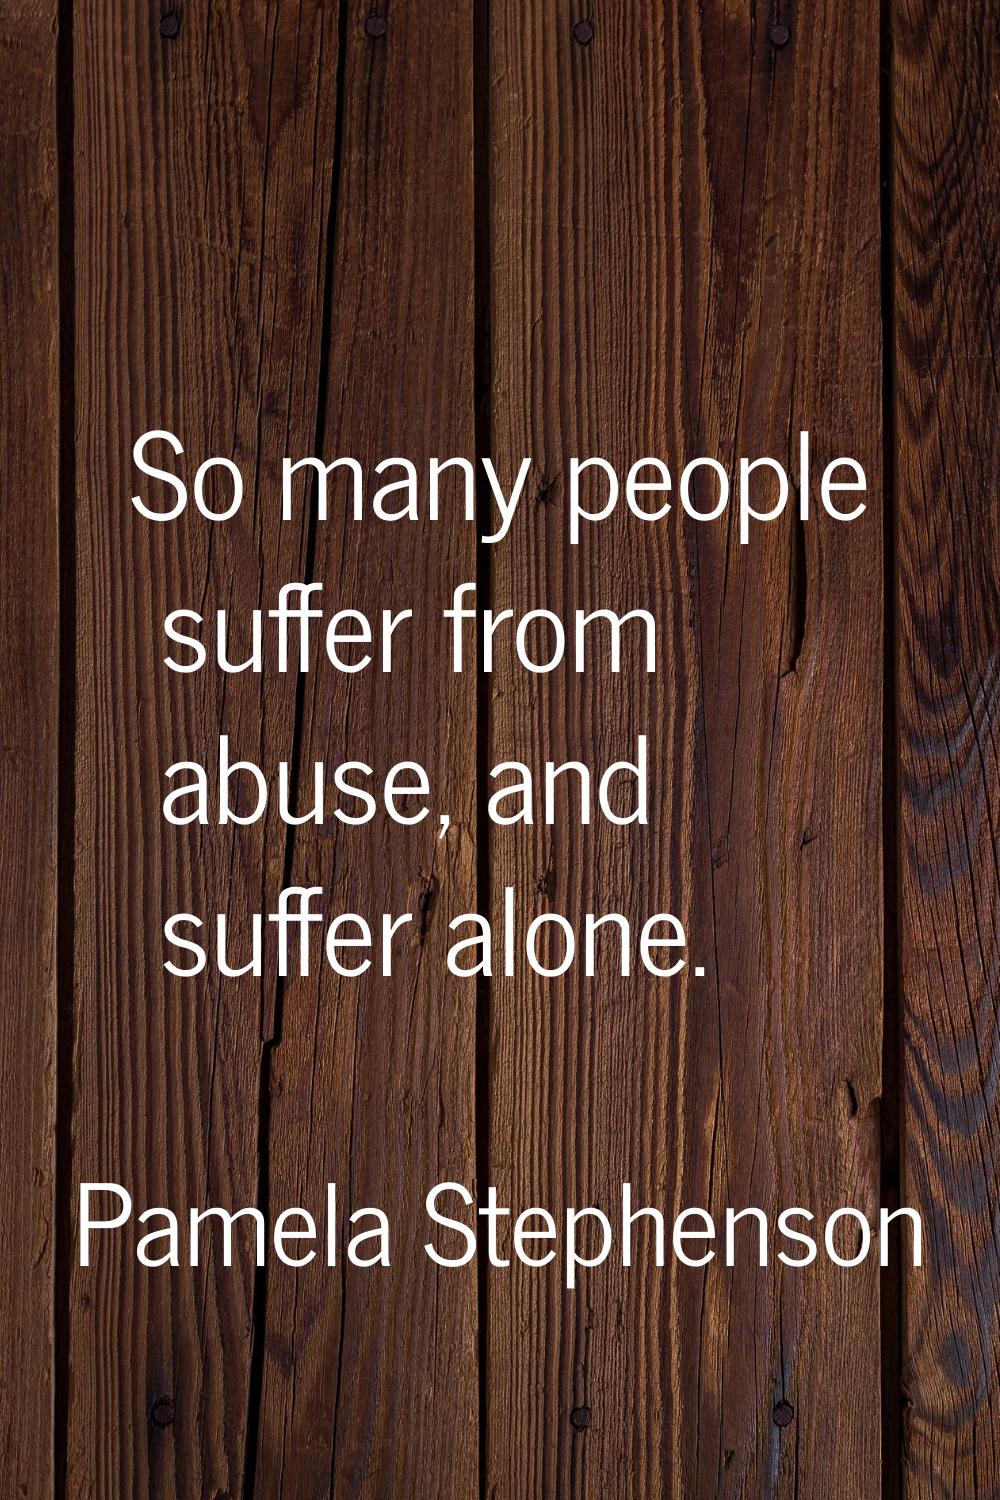 So many people suffer from abuse, and suffer alone.